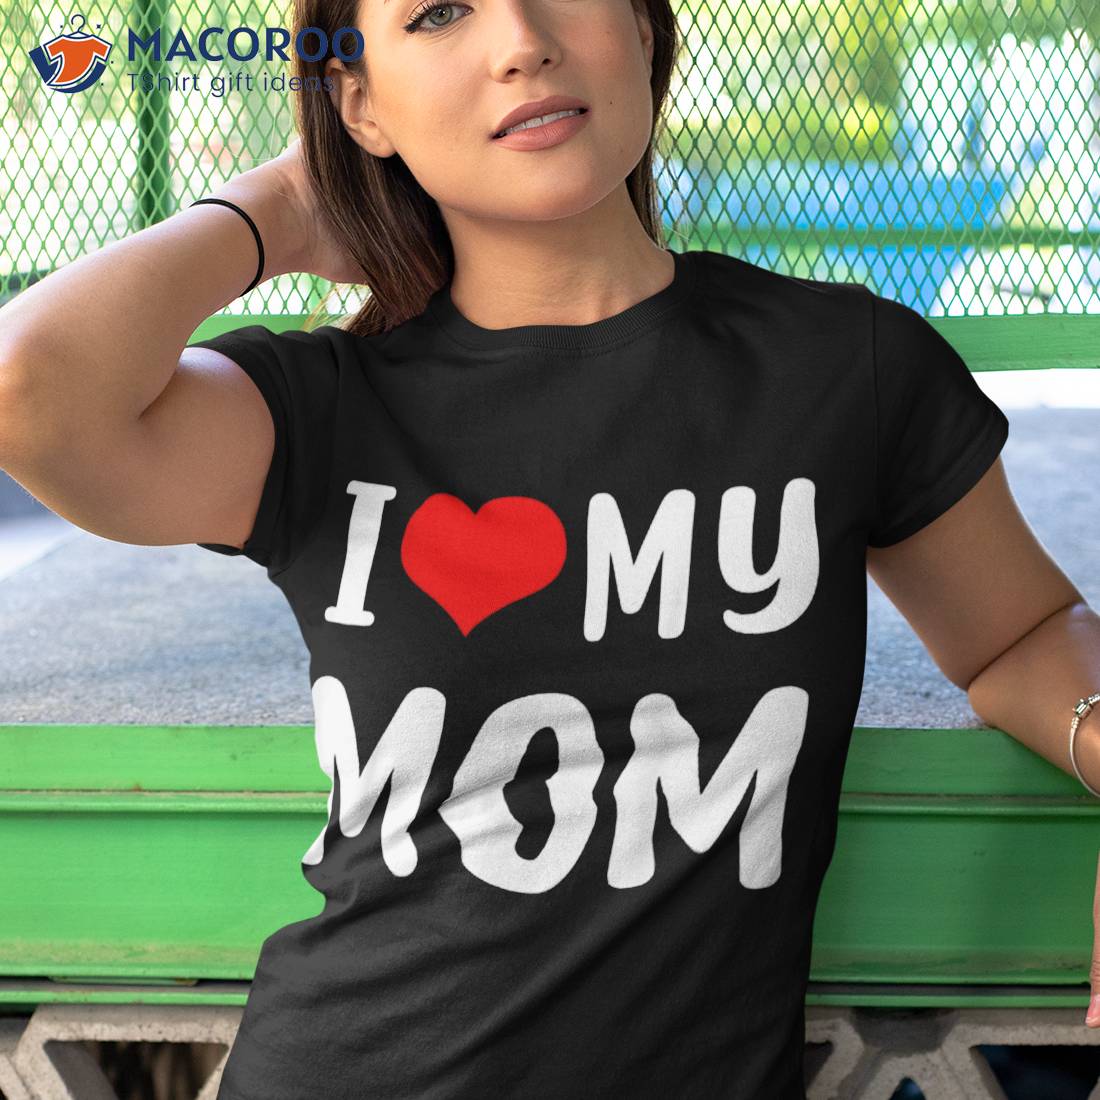 https://images.macoroo.com/wp-content/uploads/2023/05/i-love-my-mom-funny-mothers-day-gifts-for-mommy-mama-shirt-tshirt-1-1.jpg